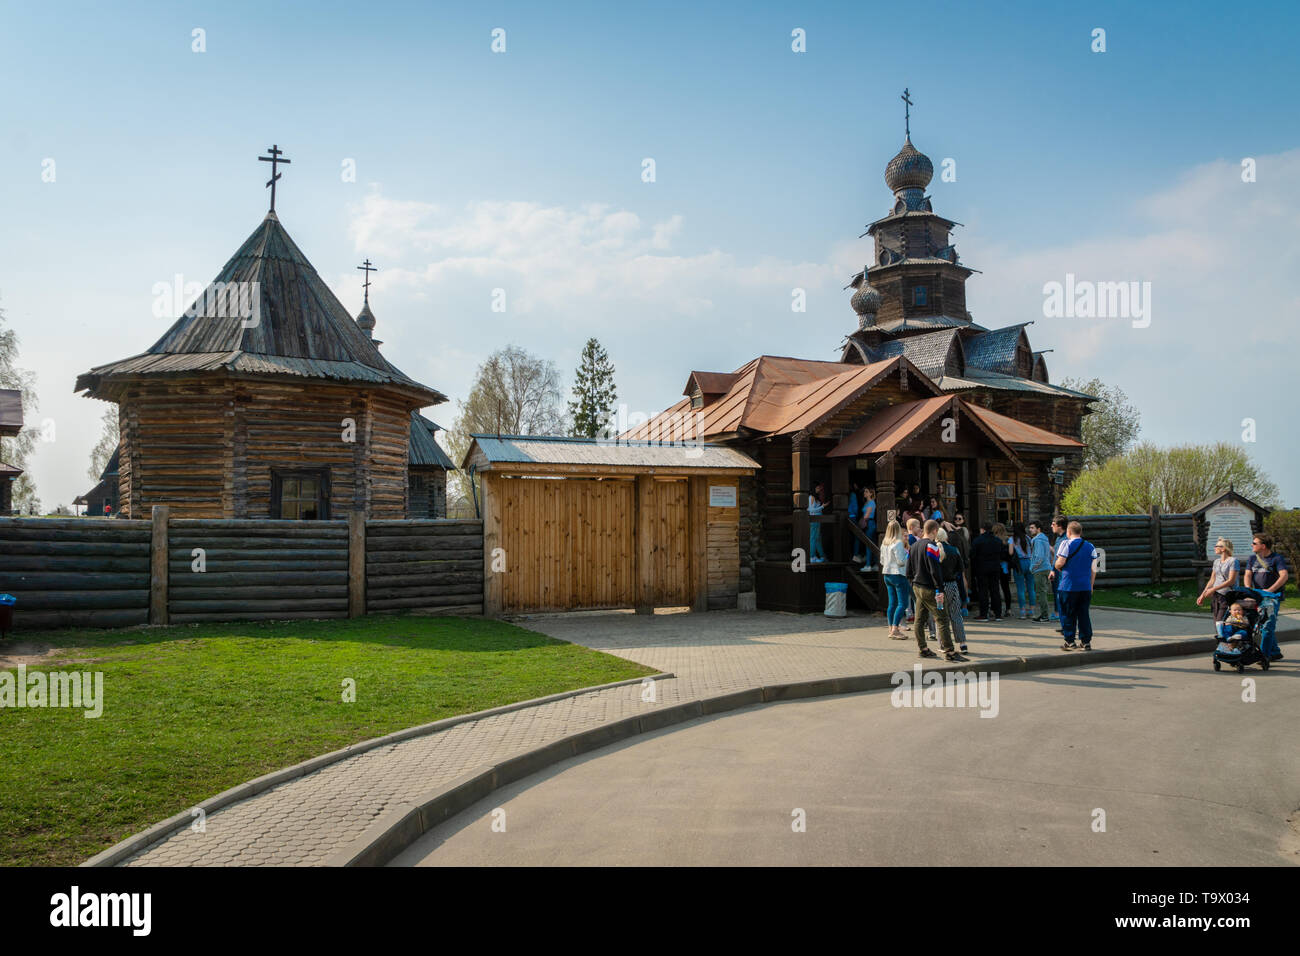 Suzdal, Russia - May 2019:  Wooden traditional buildings in the museum of wooden architecture in Suzdal, Russia. Suzdal is a Golden Ring town Stock Photo